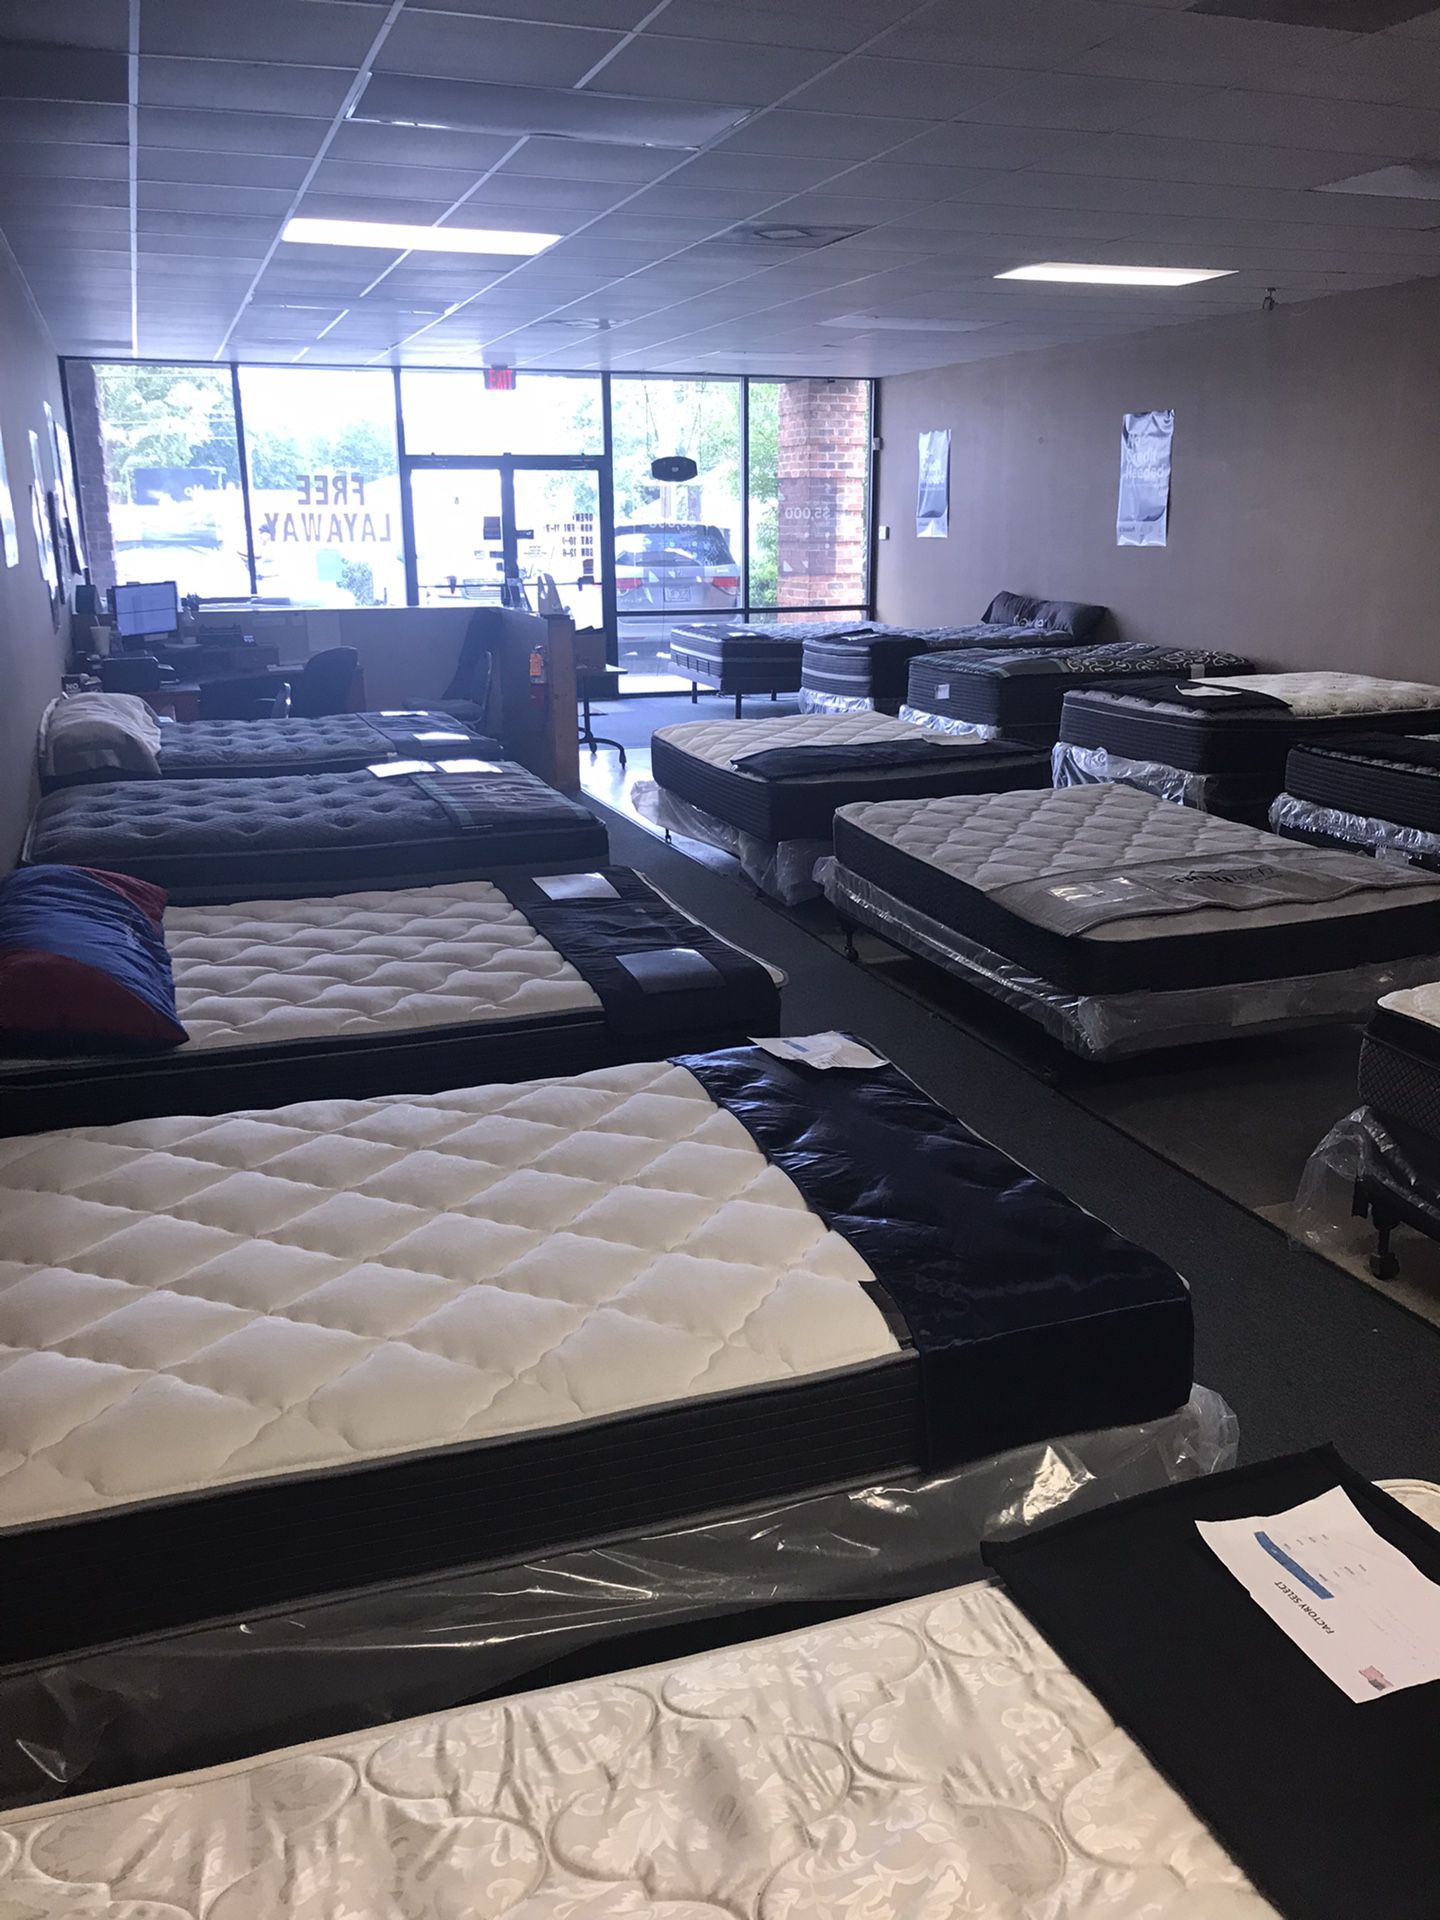 🤑Brand New Twin Mattresses Starting At $89 (all sizes available)🤑